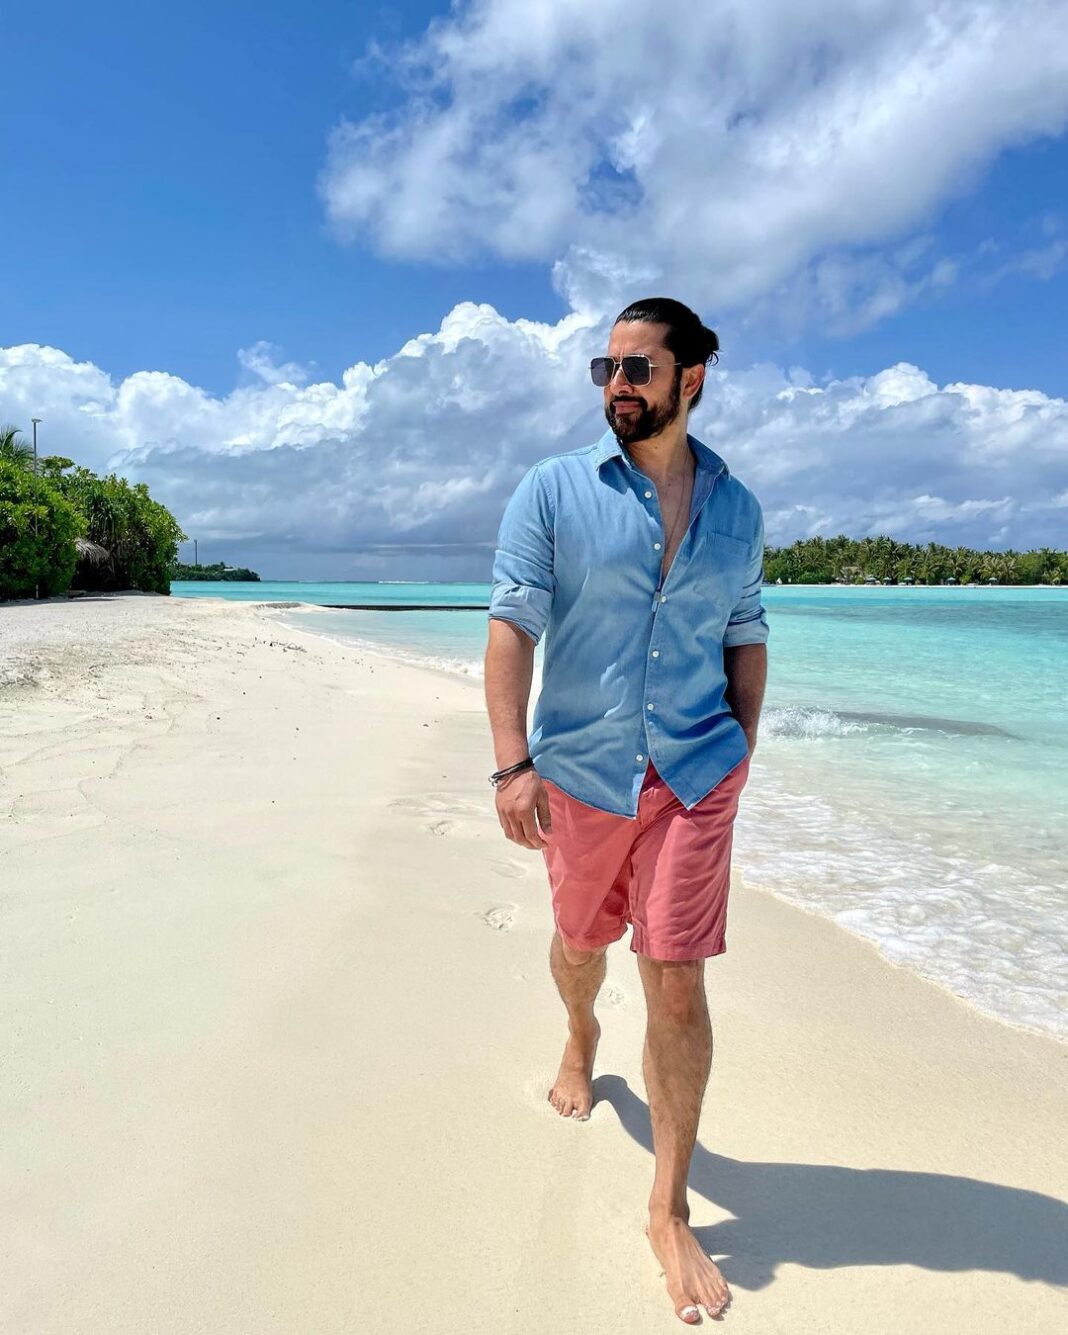 Aftab Shivdasani Instagram - ‘Dear ocean, thank you for making us feel tiny, humble, inspired and salty. All at once.’ #grateful ☀️ 🌊 Thank you @dineshjayasanka070976 and @anantaradhigu for the impeccable hospitality. Pure bliss. Much gratitude. 💙💫 Maldives